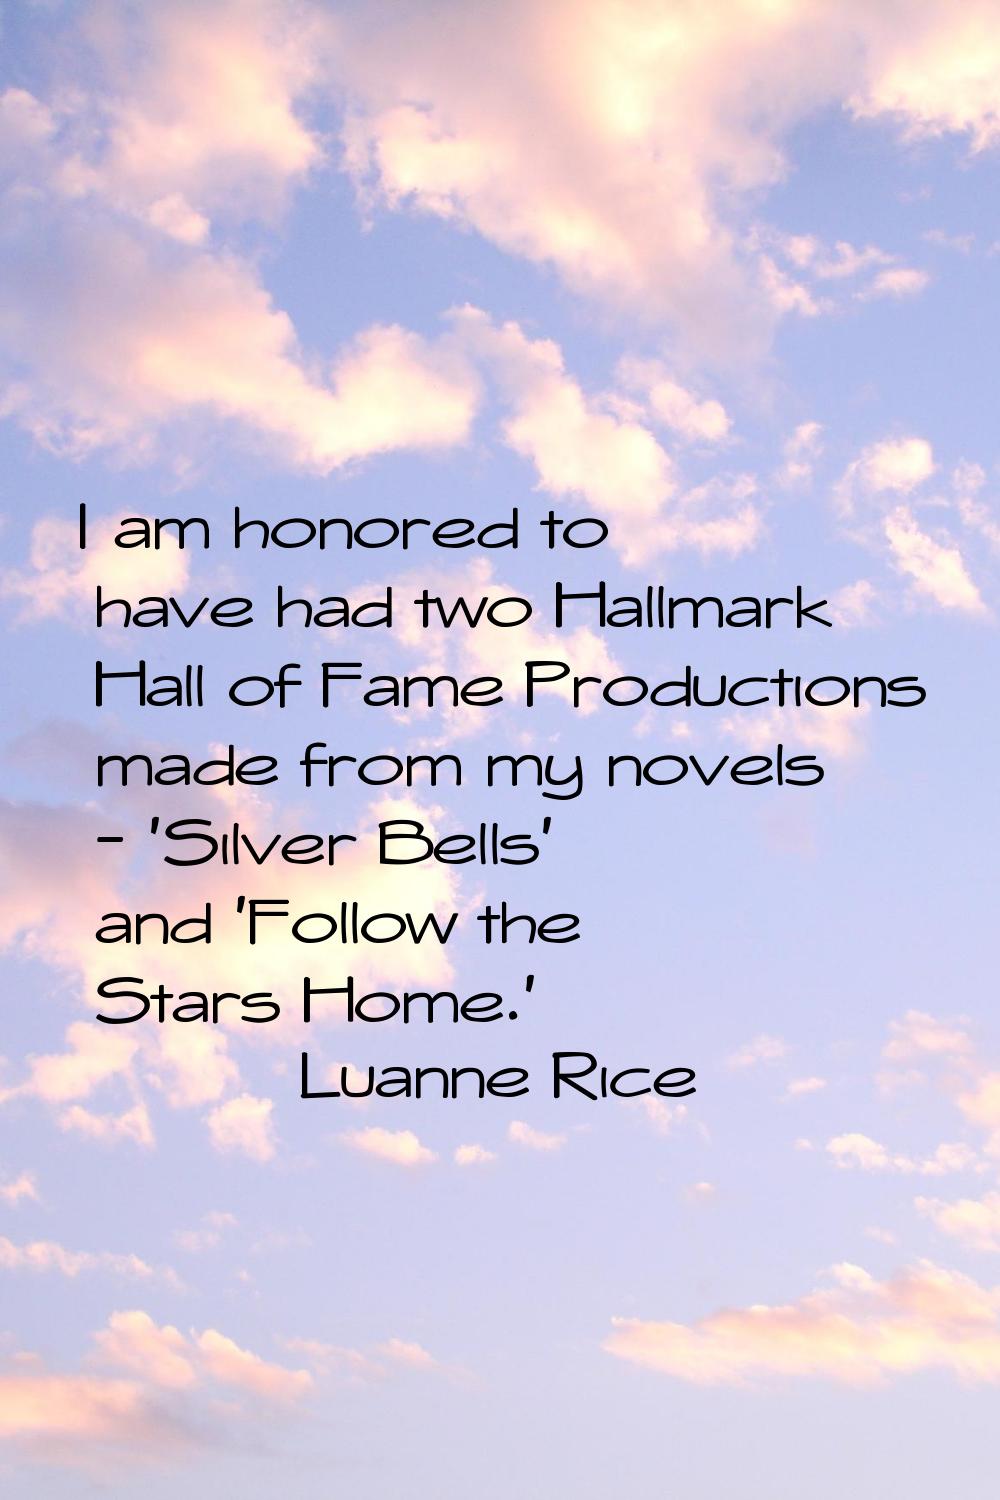 I am honored to have had two Hallmark Hall of Fame Productions made from my novels - 'Silver Bells'